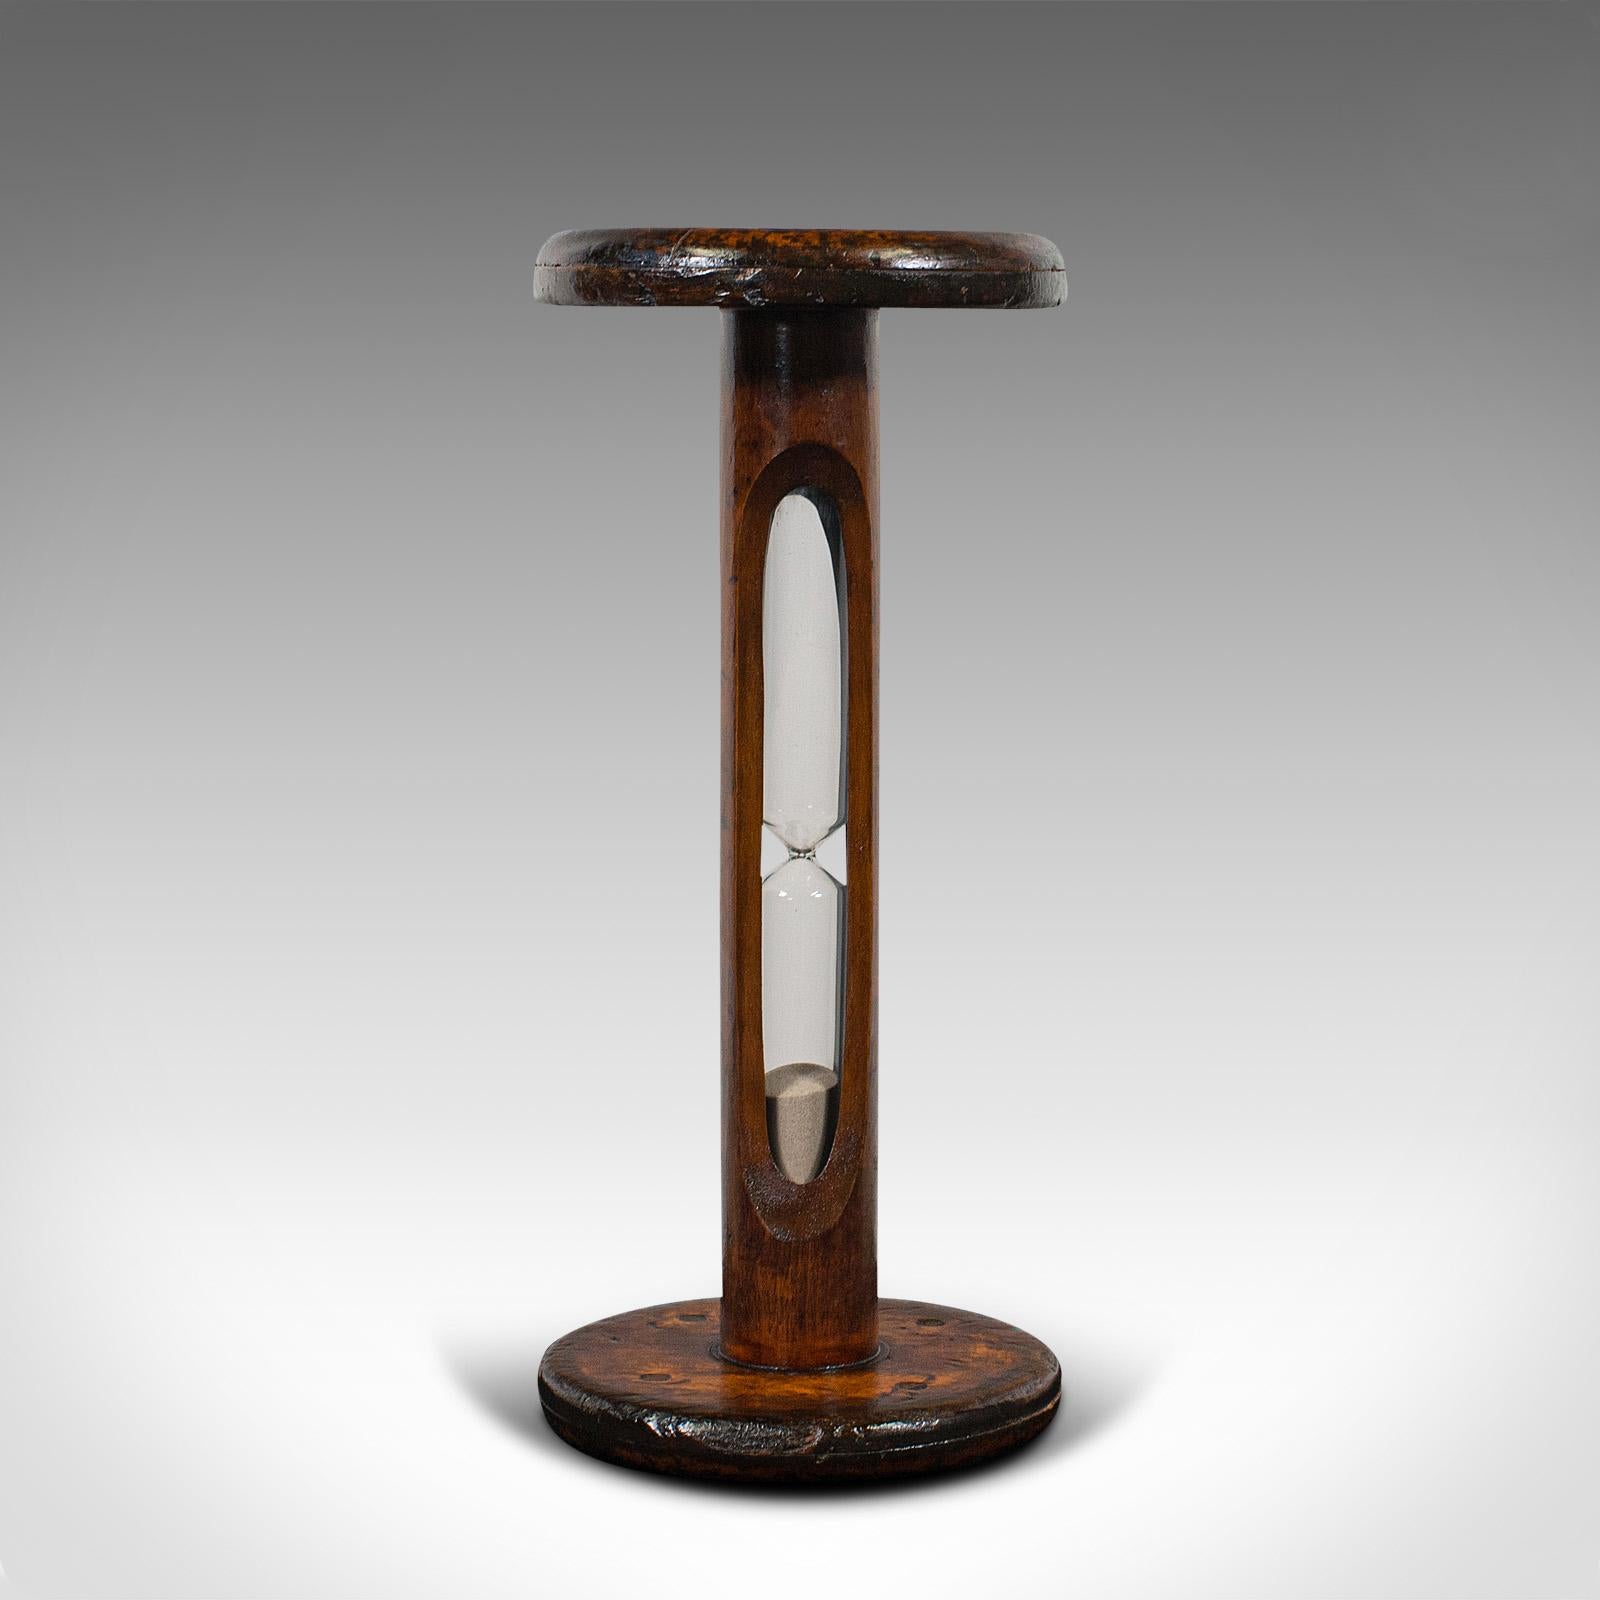 19th Century Antique Cookie Baking Sand Timer, English, Fruitwood, Glass, Victorian, C.1900